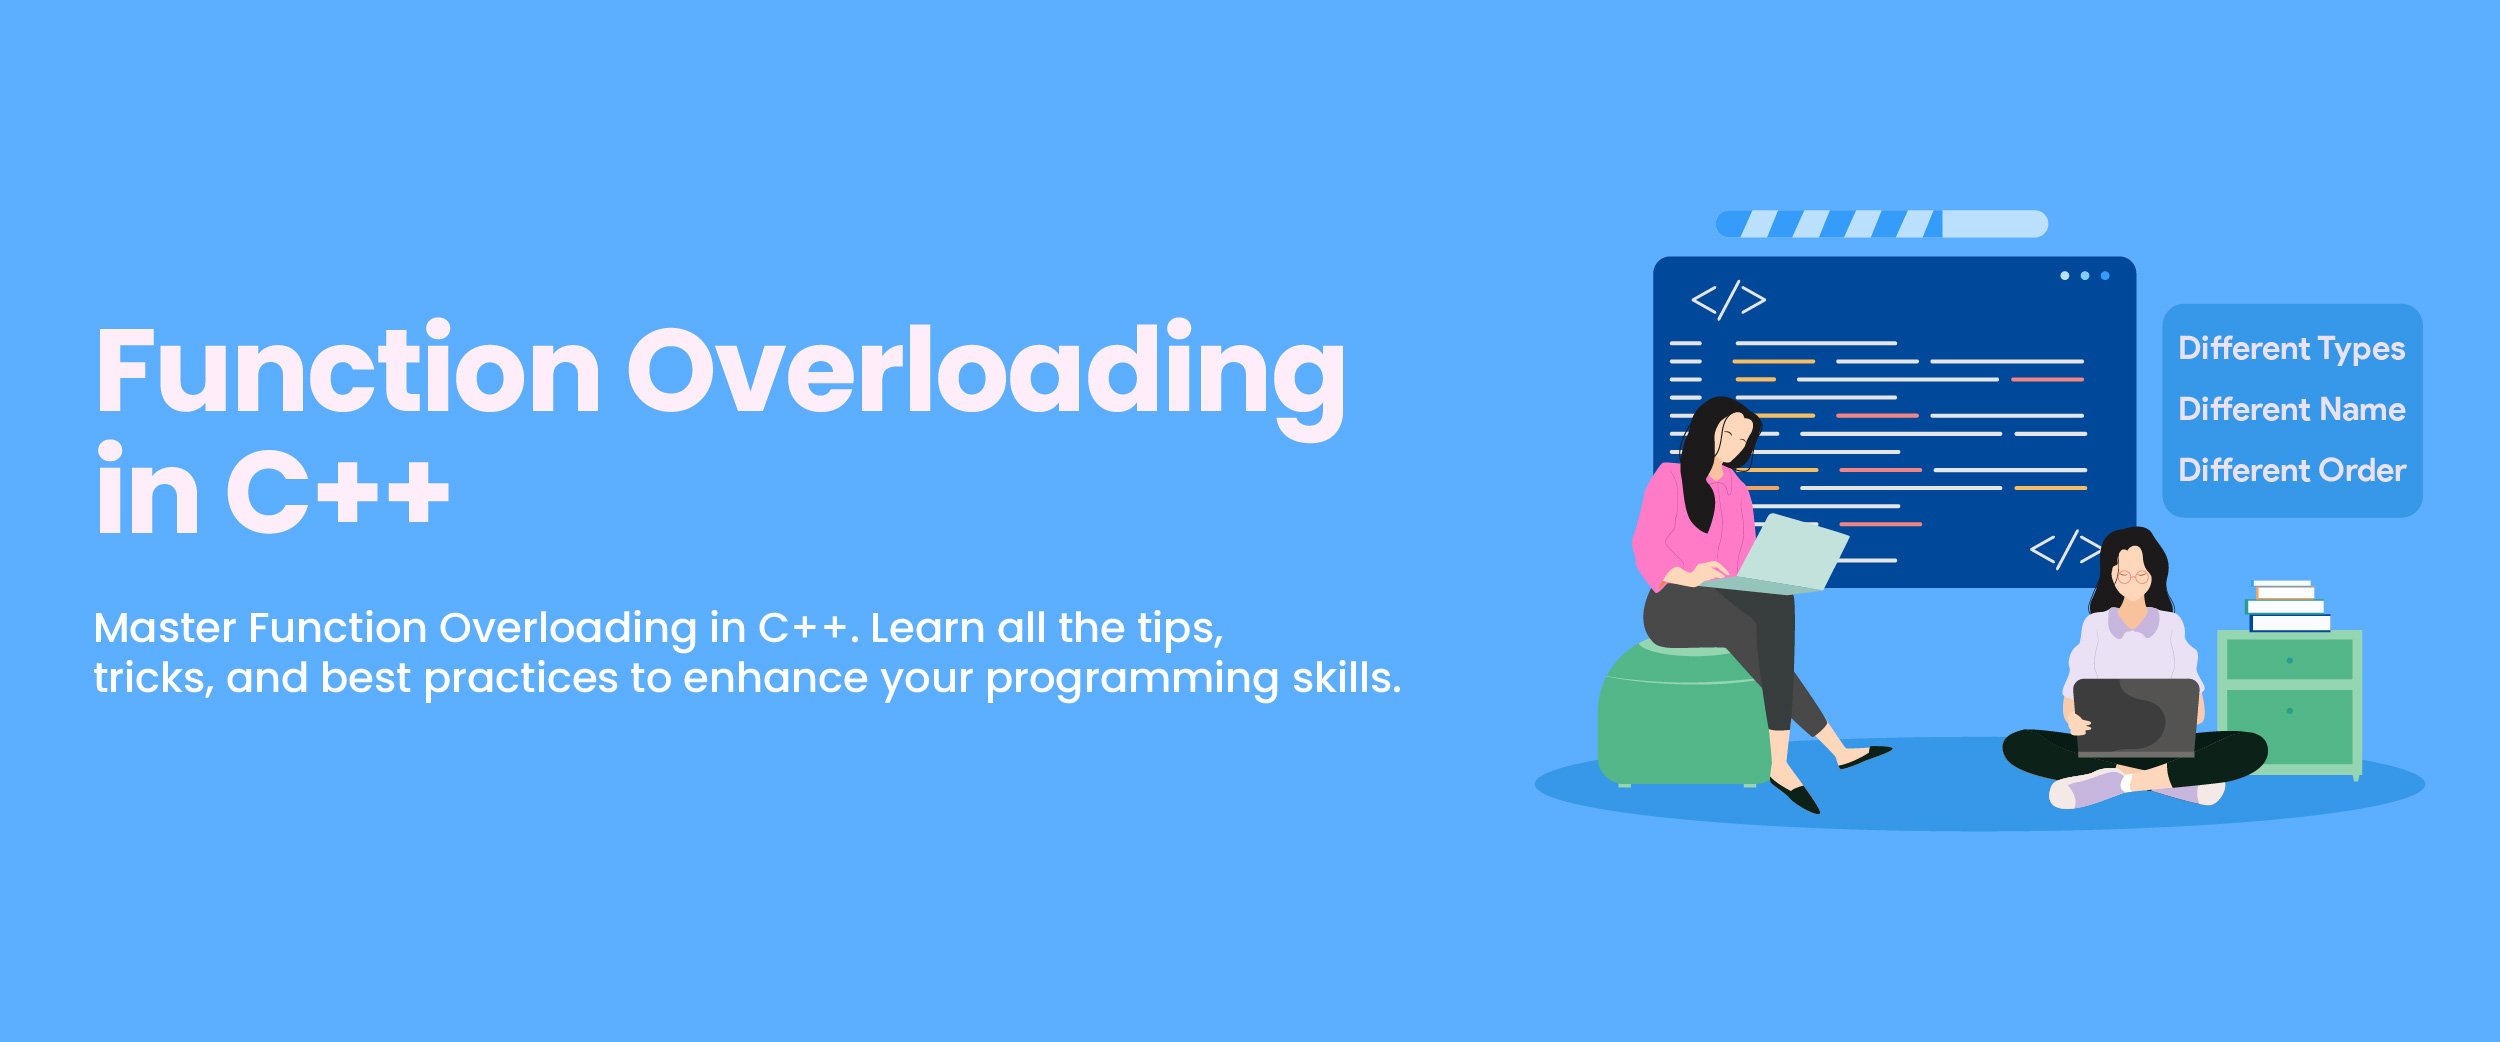 Method Overloading in C++, Working, Advantages